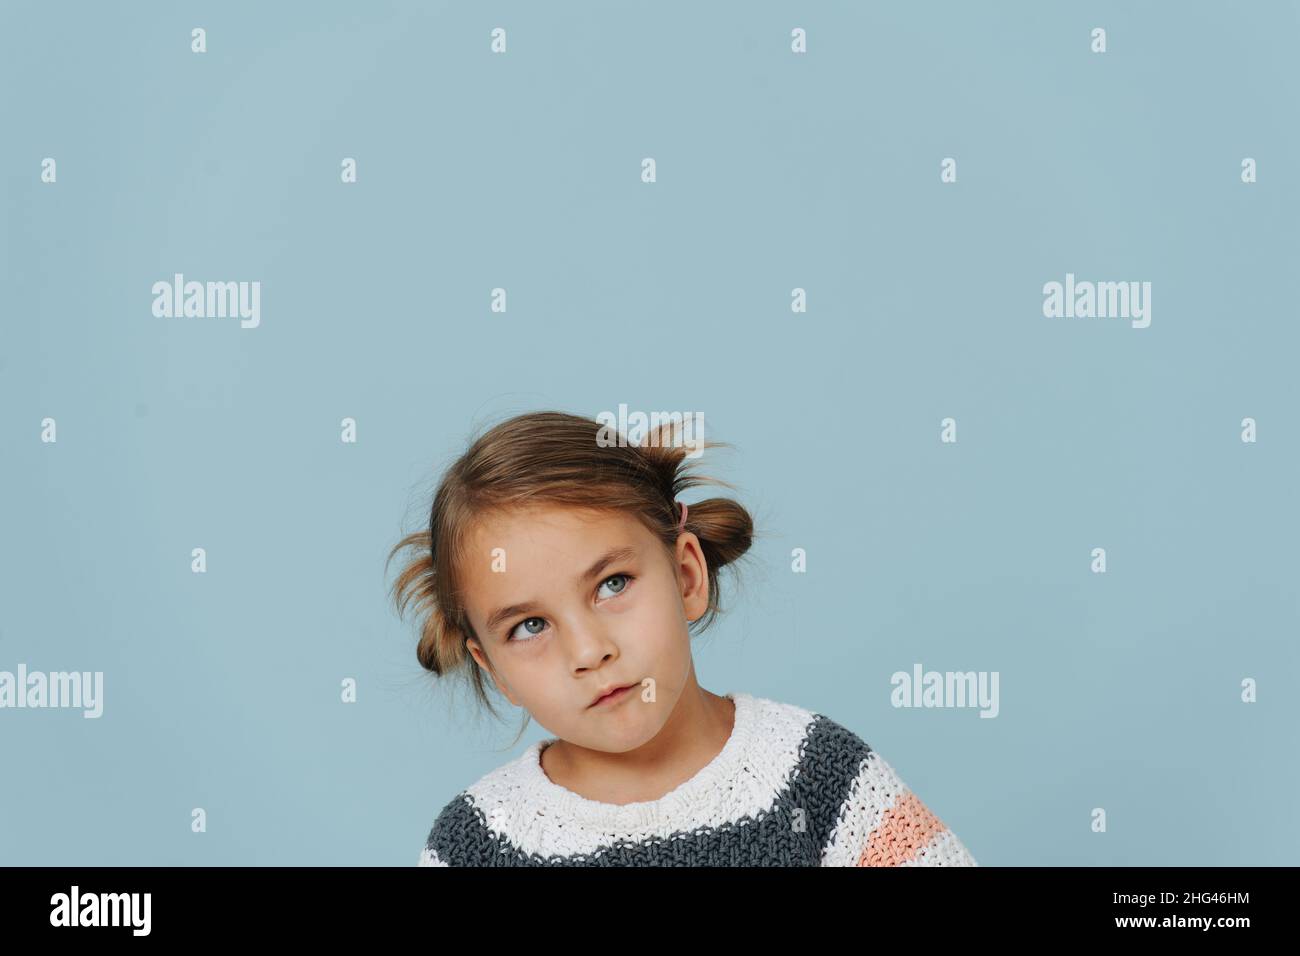 Looking up tight-lipped little girl in striped sweater, hair in buns over blue. A lot of copy space around. Stock Photo